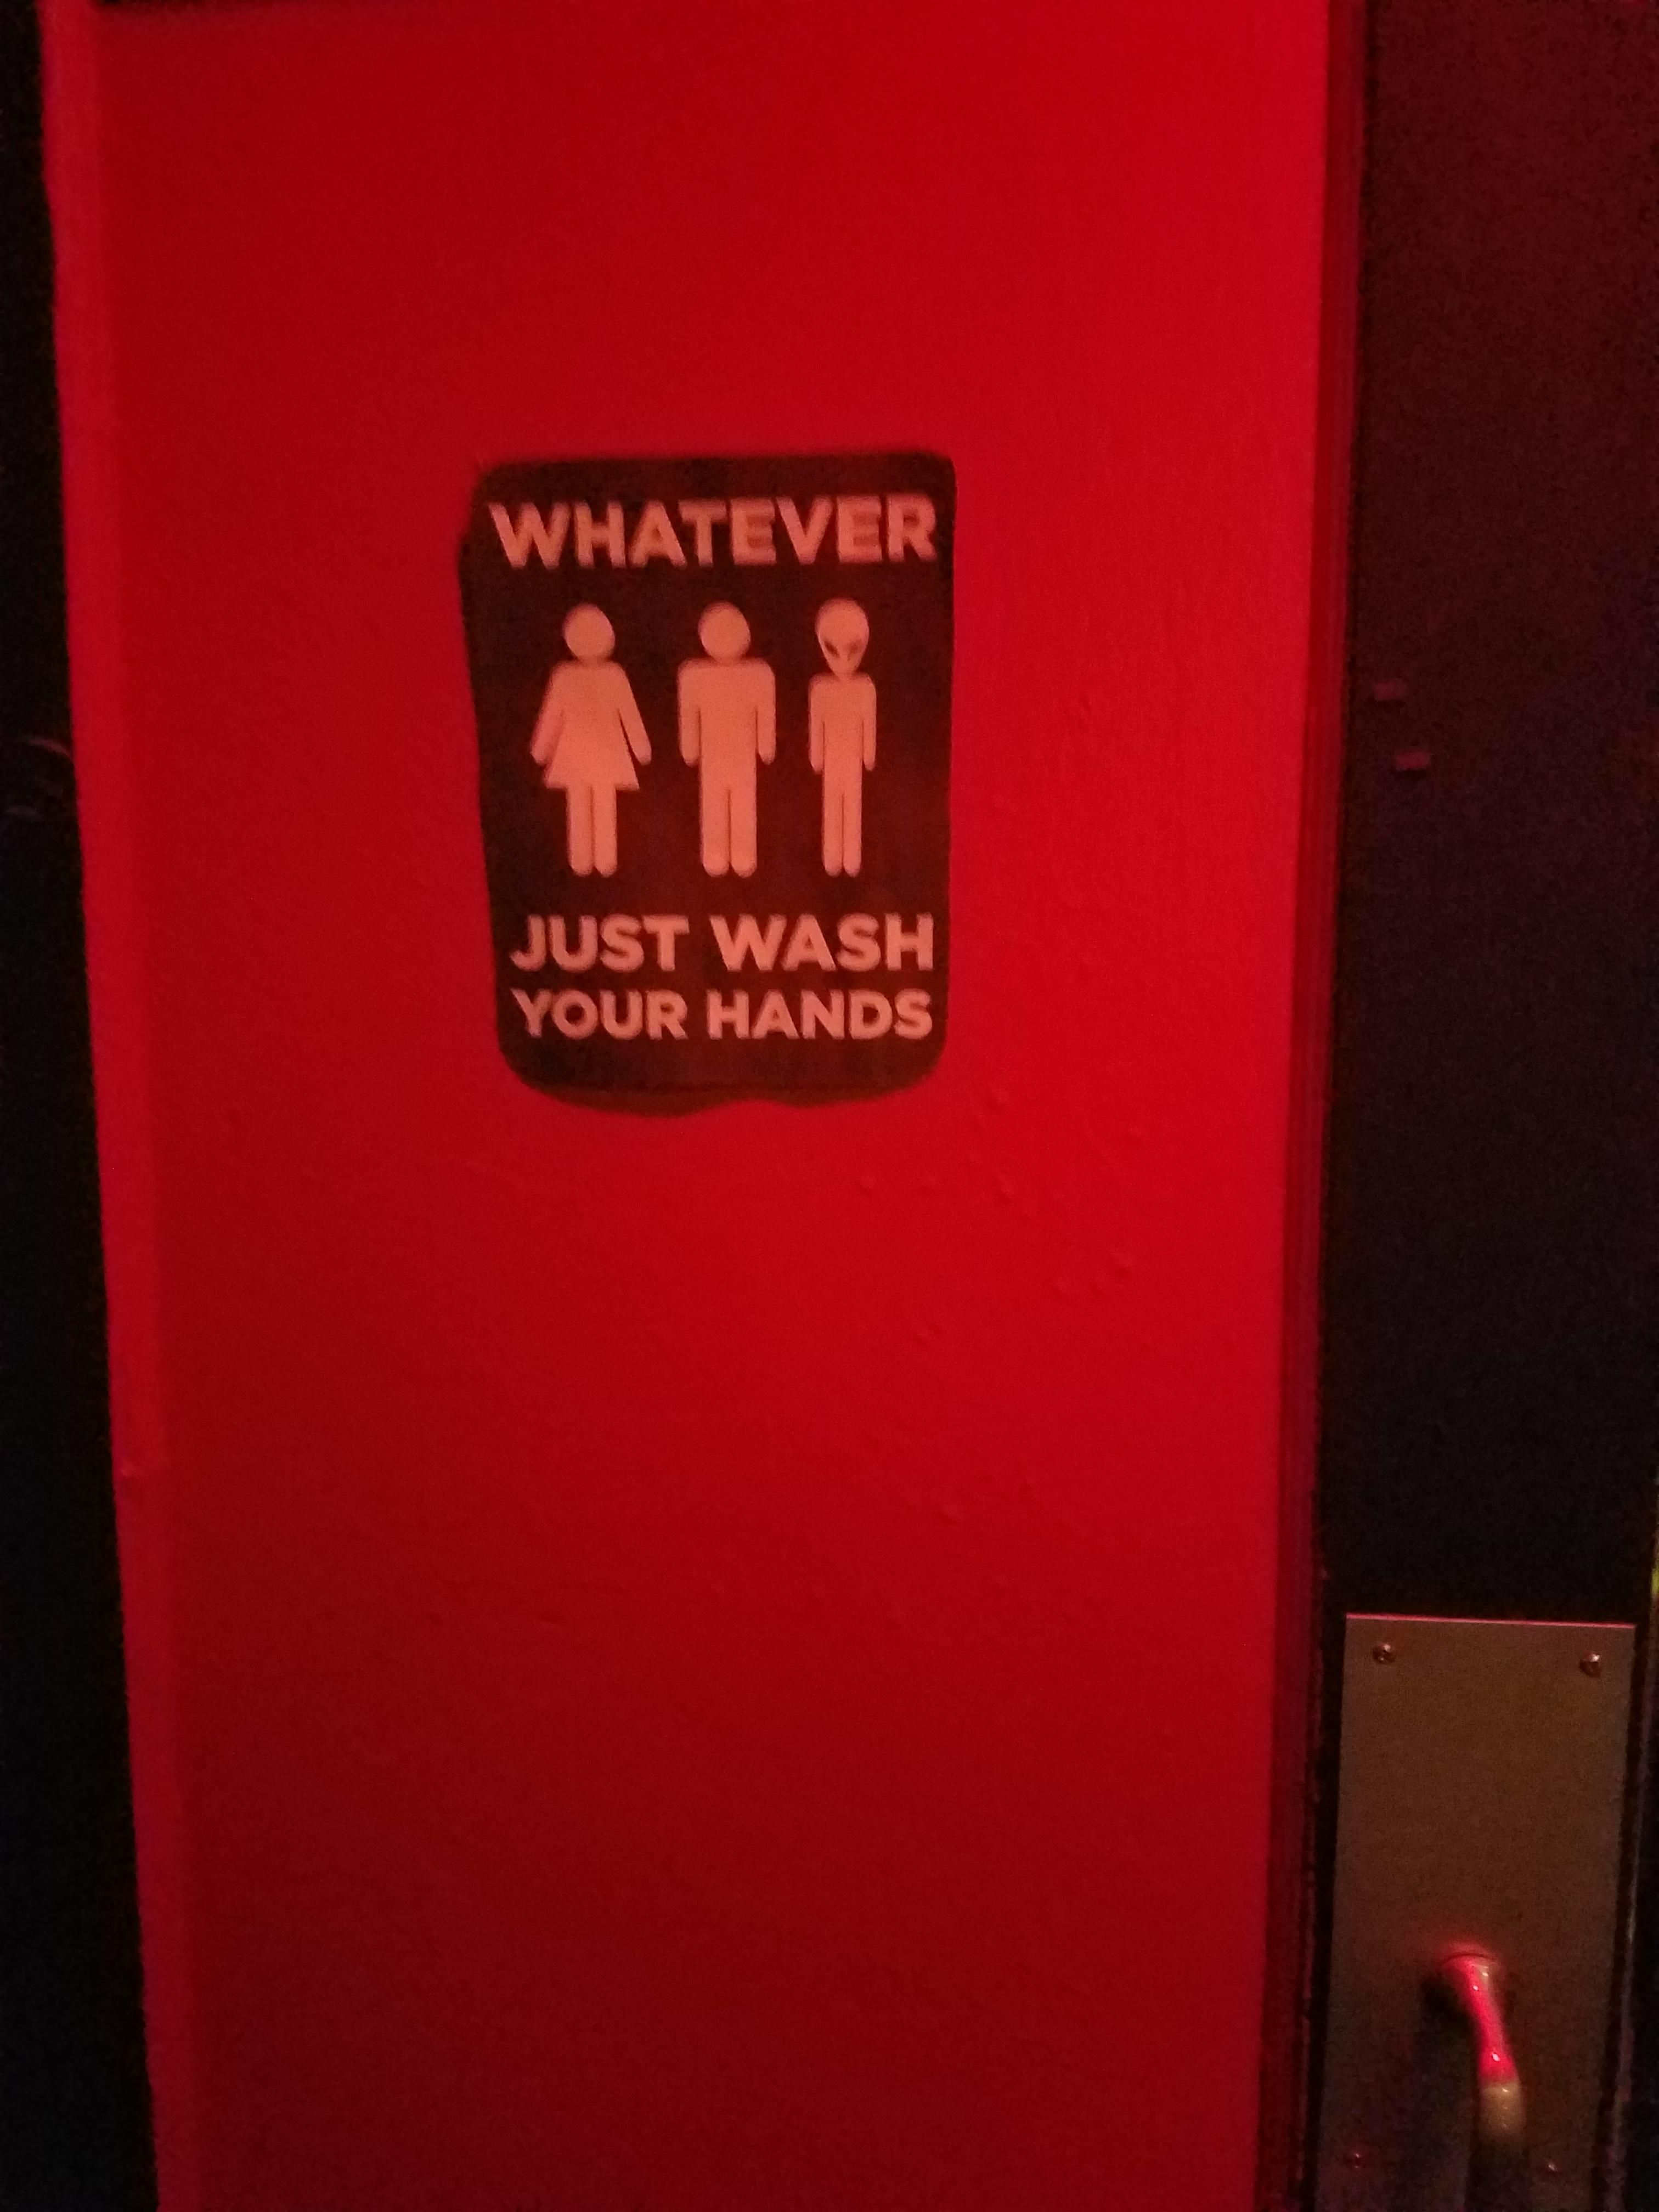 In addition to a kids menu, my local dive bar also has a gender and species neutral bathroom